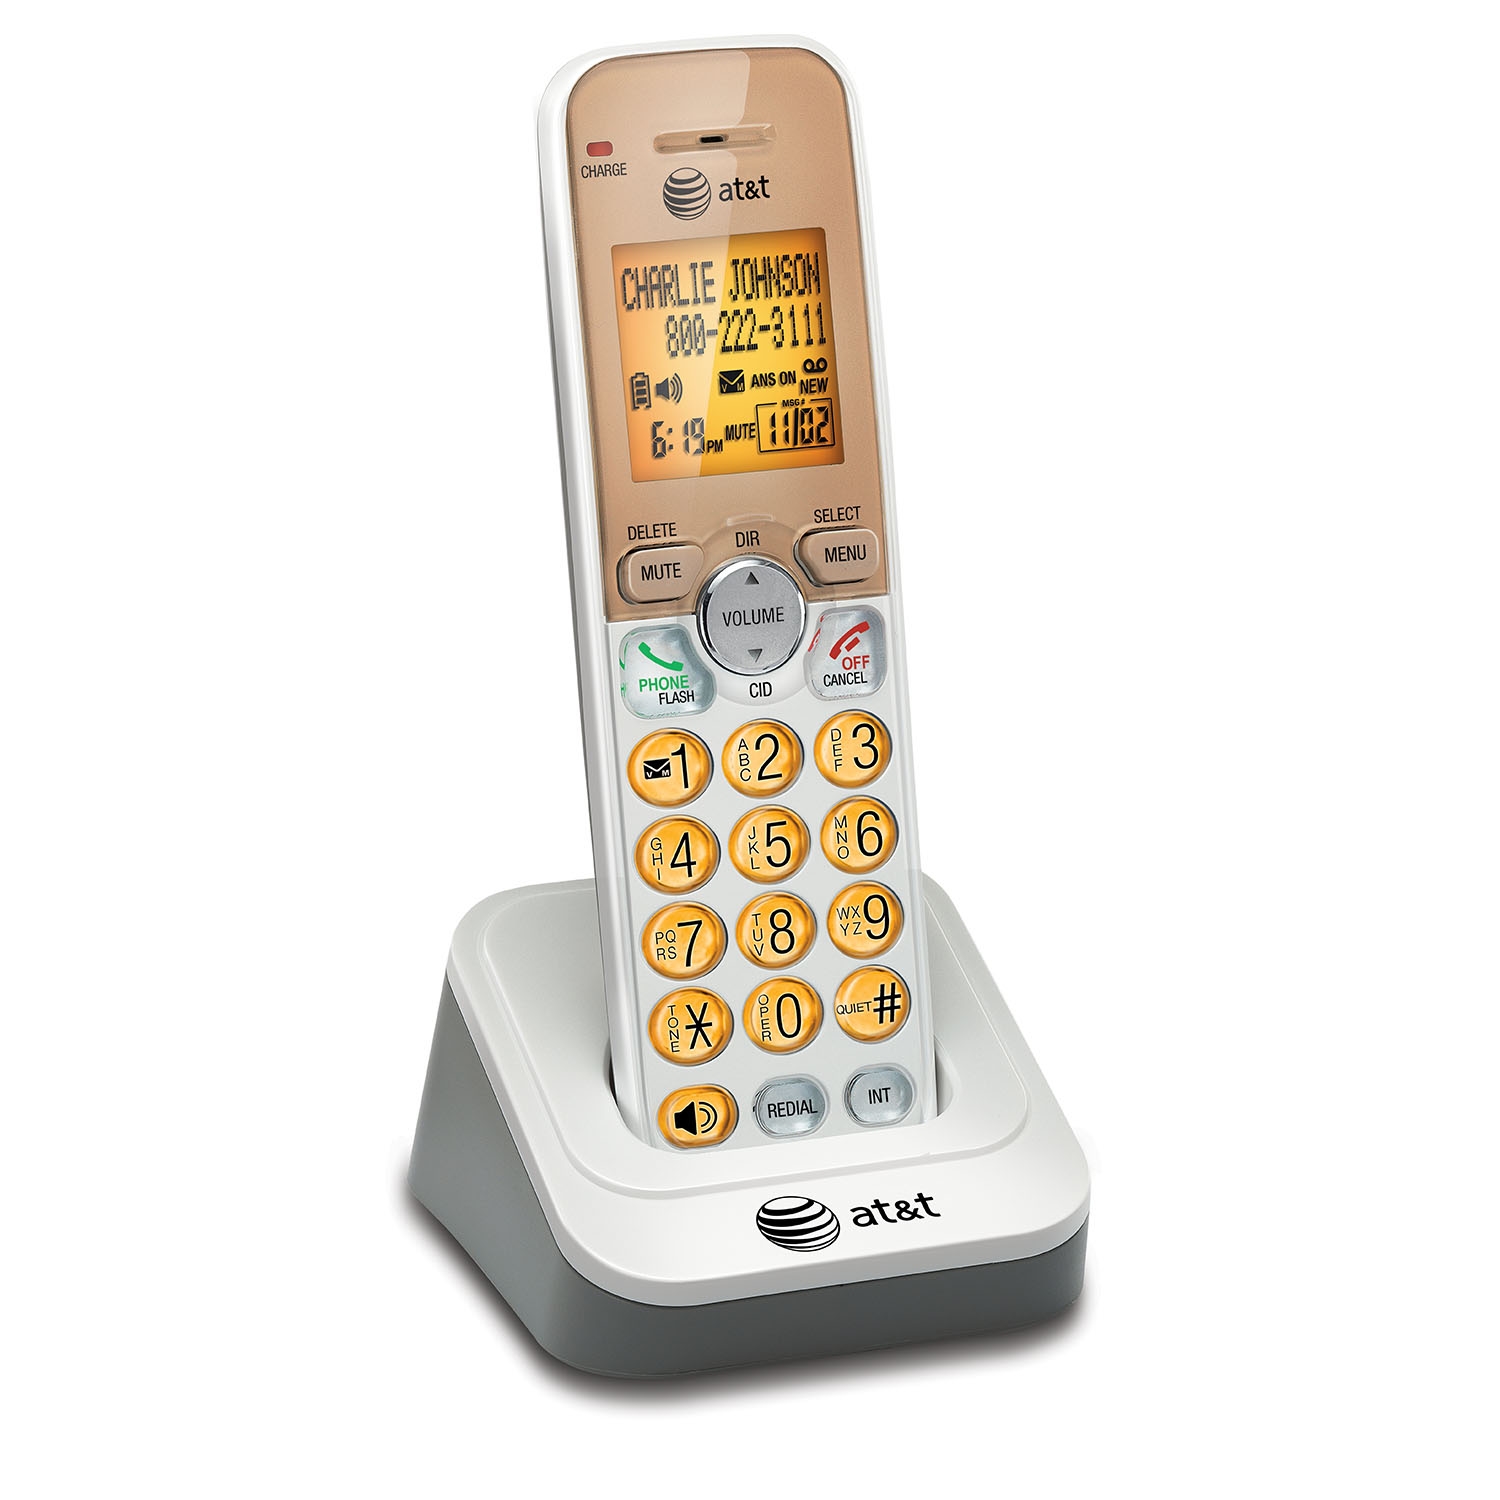 5 handset cordless answering system with caller ID/call waiting - view 4